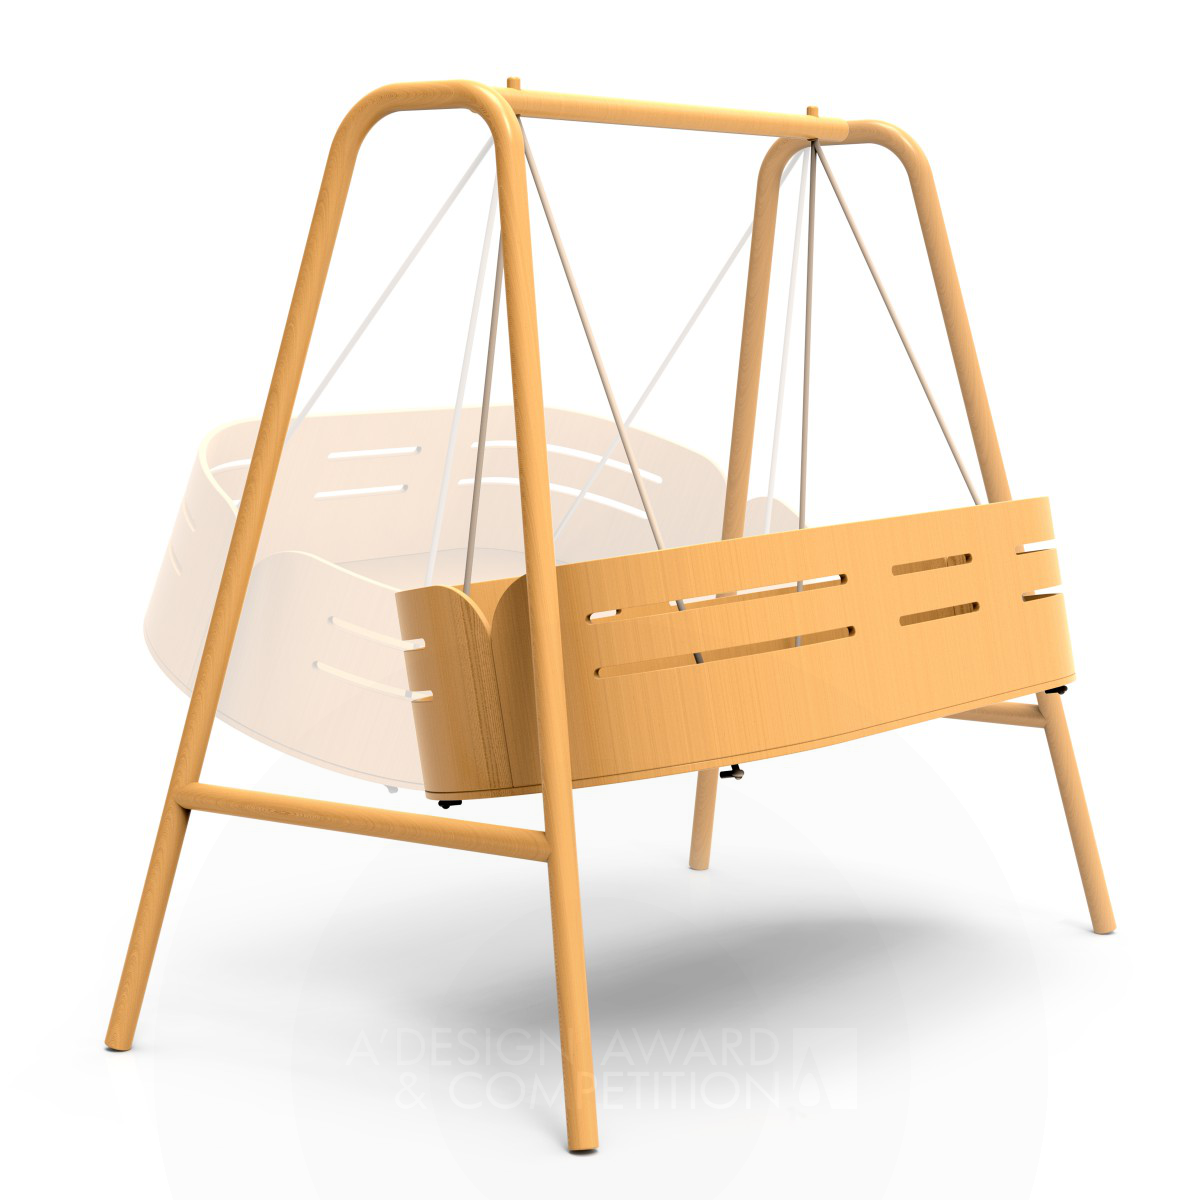 "Grow Up" - A Sustainable and Multifunctional Crib